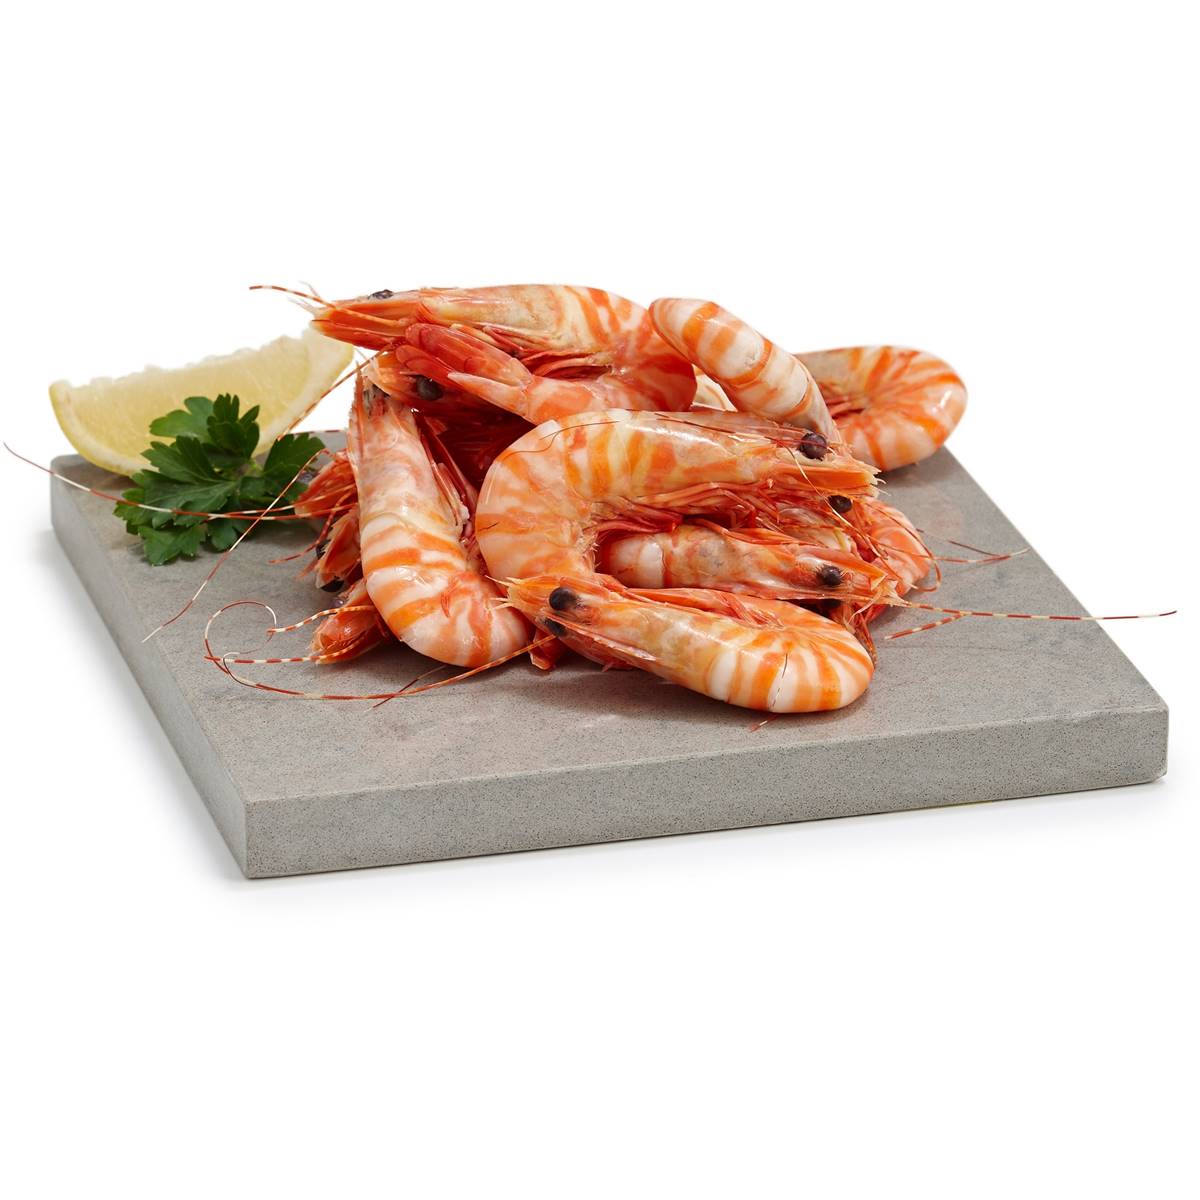 Calories in Woolworths Thawed Medium Cooked Tiger Prawns calcount